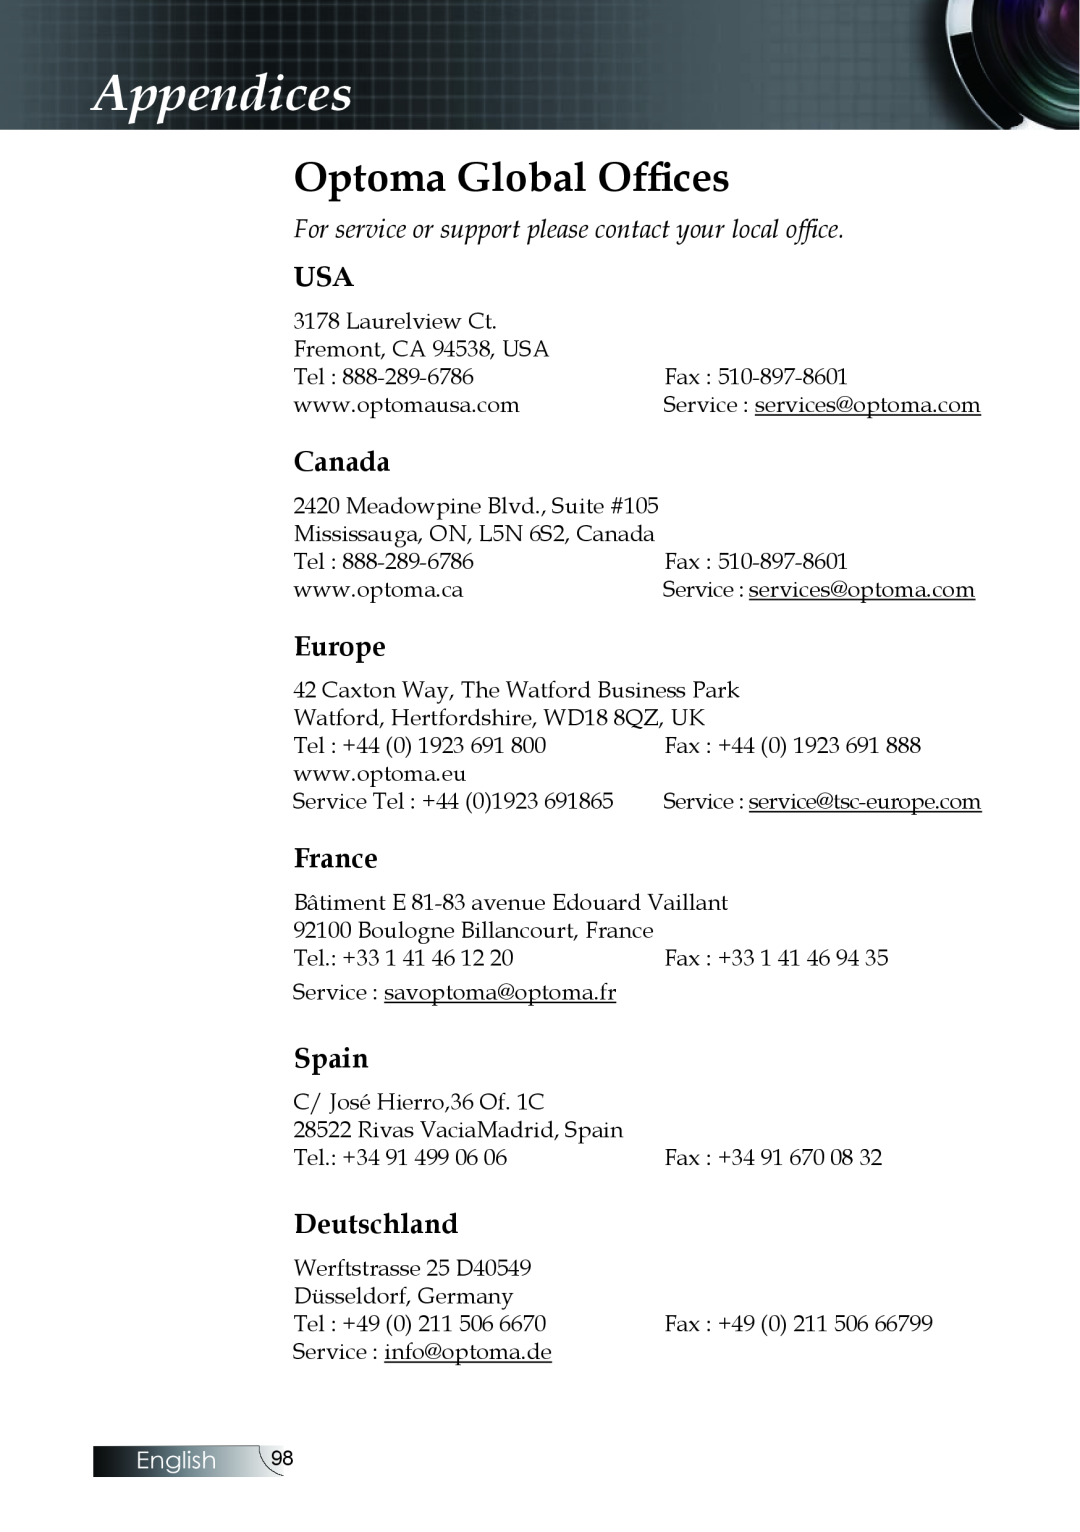 Optoma Technology EH505 manual Canada, Europe, France, Spain, Deutschland, Appendices, Optoma Global Offices, English 